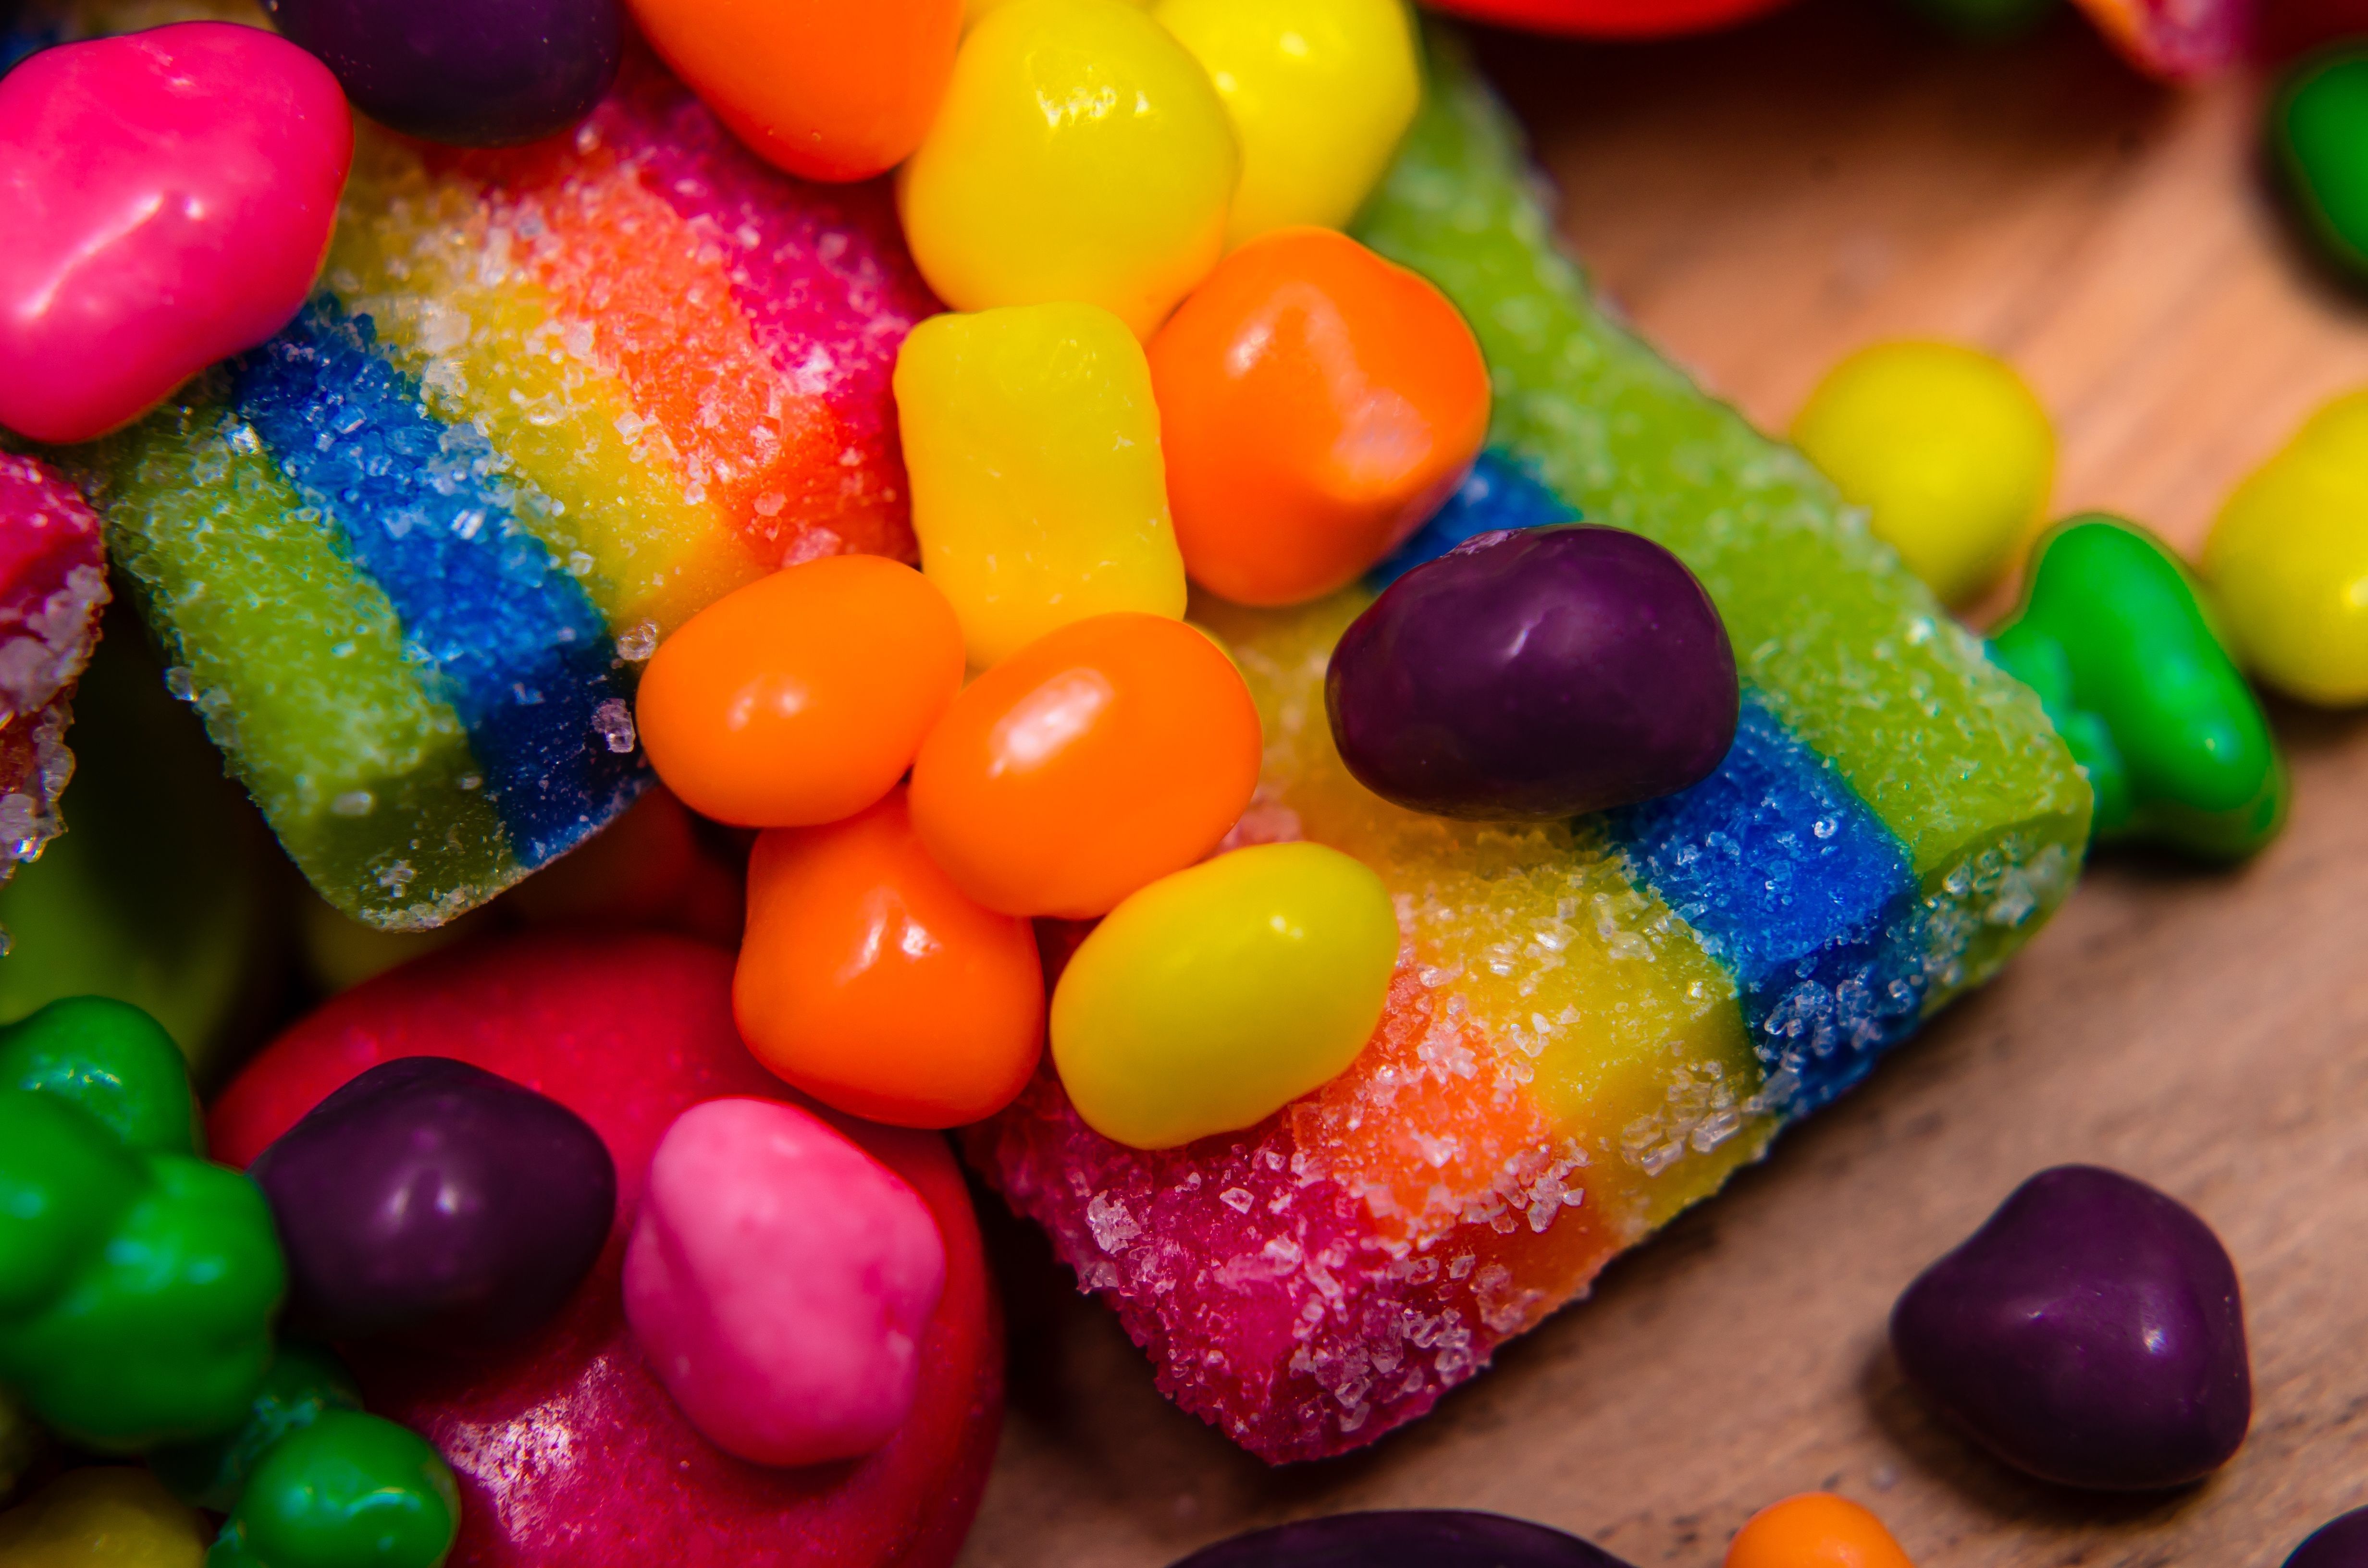 4k wallpaper candy (4928x3264). Food, Candy background, Food wallpaper